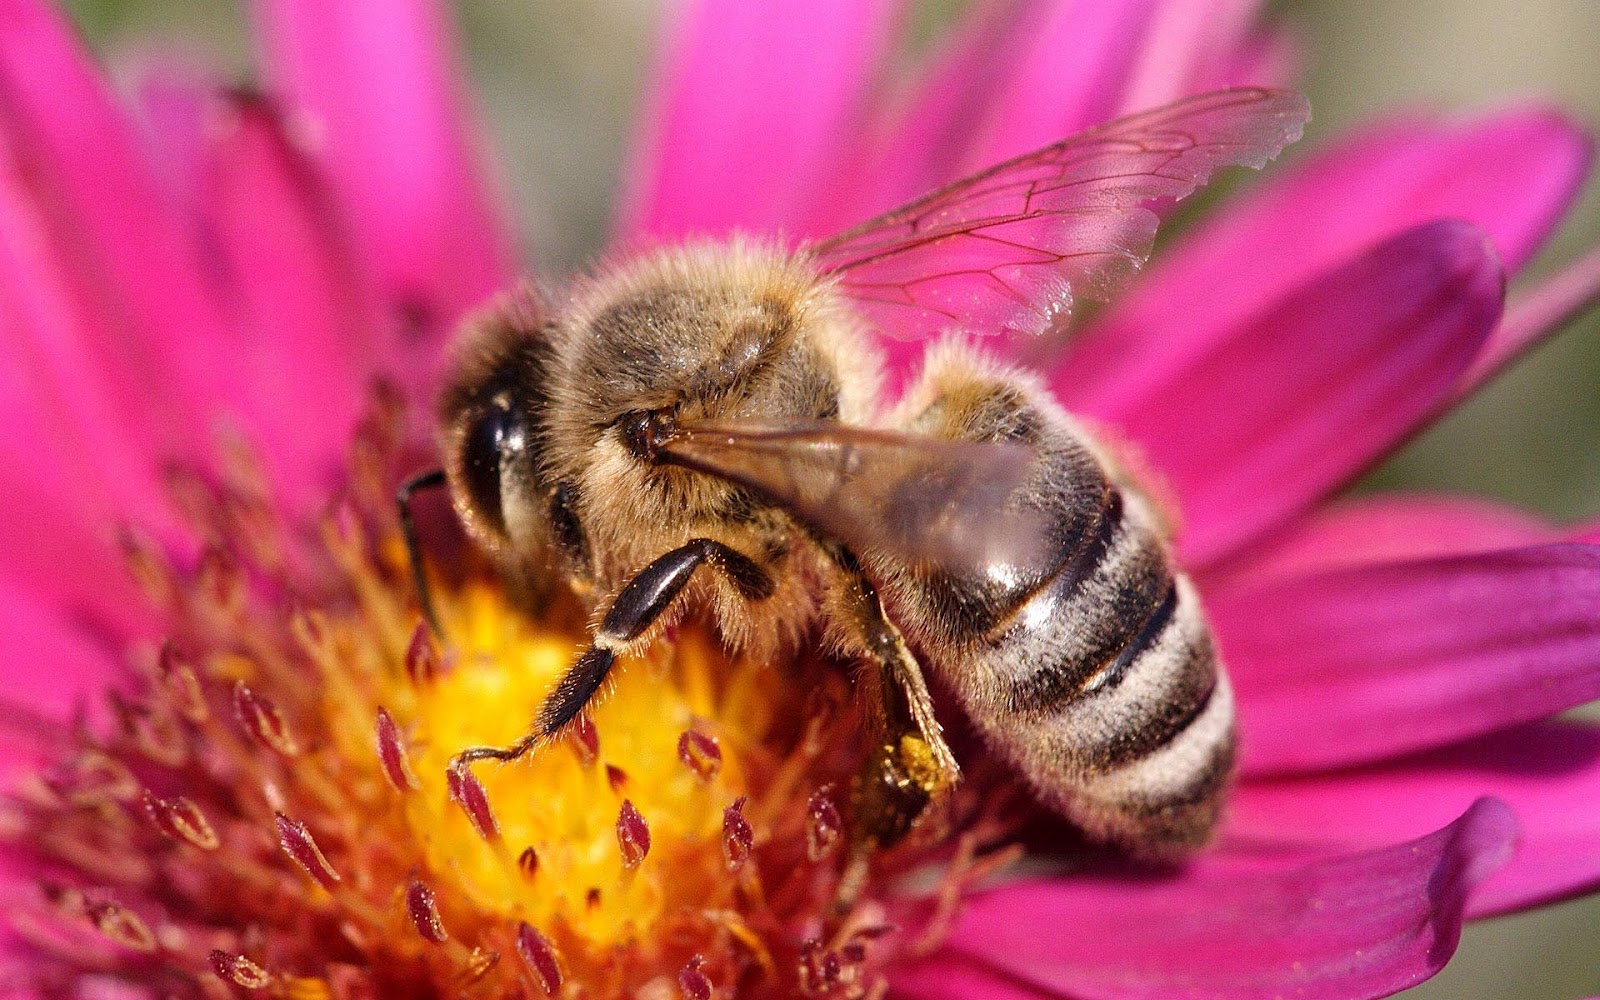 http://1.bp.blogspot.com/-F3lXk3zZvpY/UCQgDAFeT5I/AAAAAAAAAPw/k3hGjZHr6F4/s1600/hd-bee-wallpaper-with-a-bee-sitting-on-a-pink-flower-hd-bees-background-picture.jpg